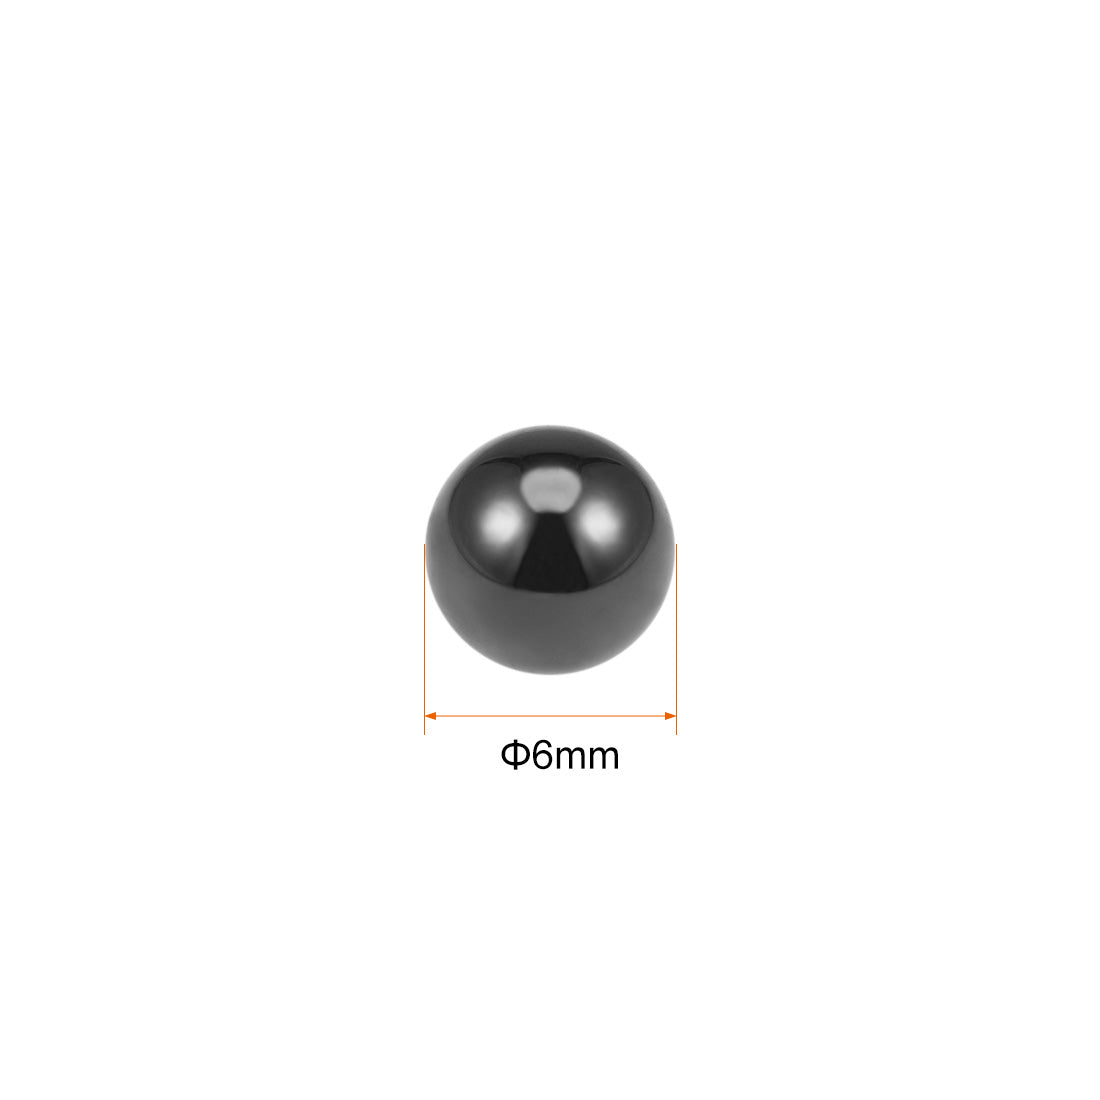 Uxcell Uxcell 4mm Ceramic Bearing Balls, Si3N4 Silicon Nitride Ball G5 Precision 5pcs